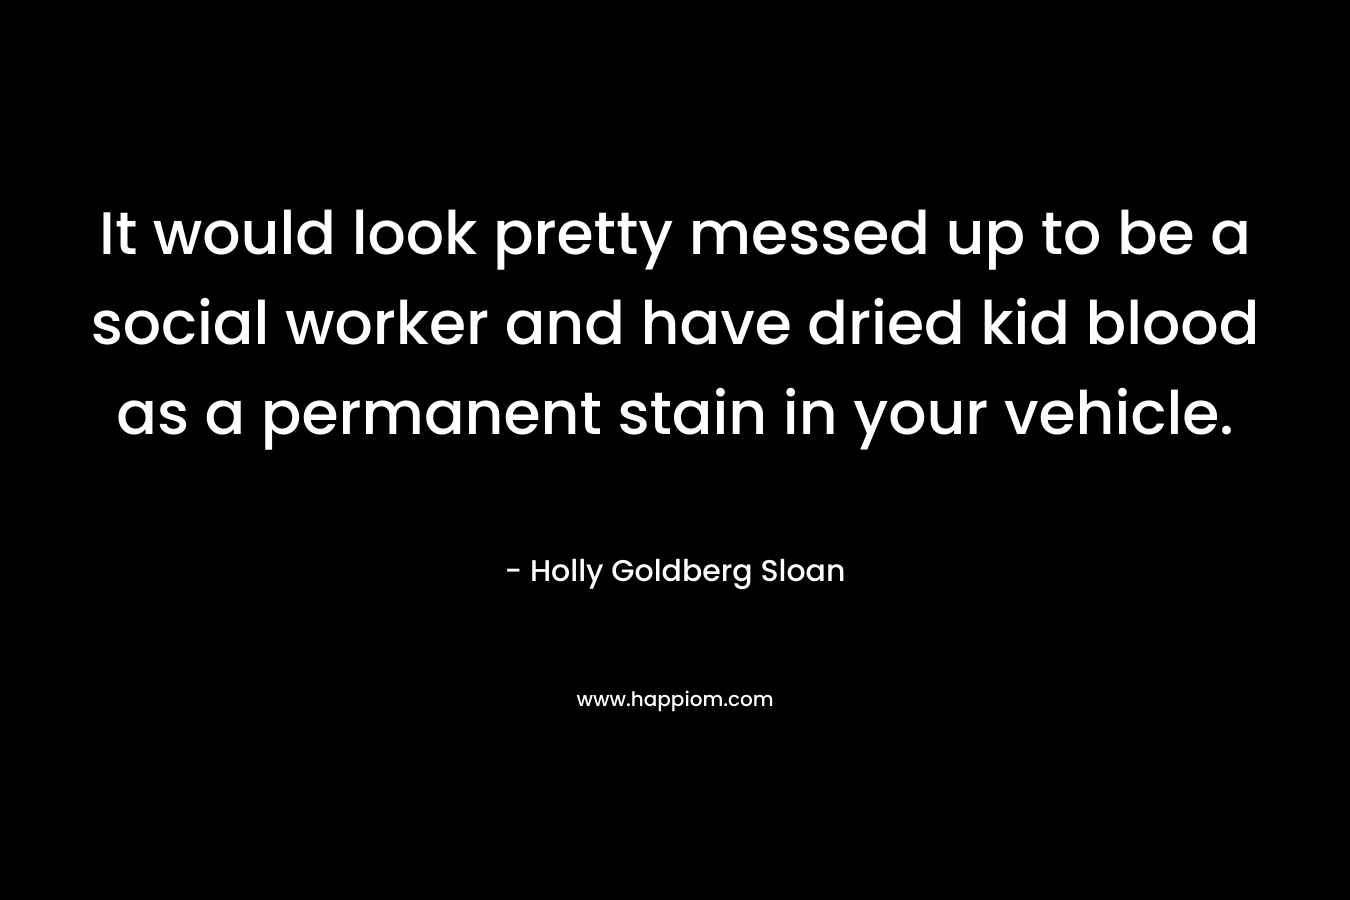 It would look pretty messed up to be a social worker and have dried kid blood as a permanent stain in your vehicle. – Holly Goldberg Sloan